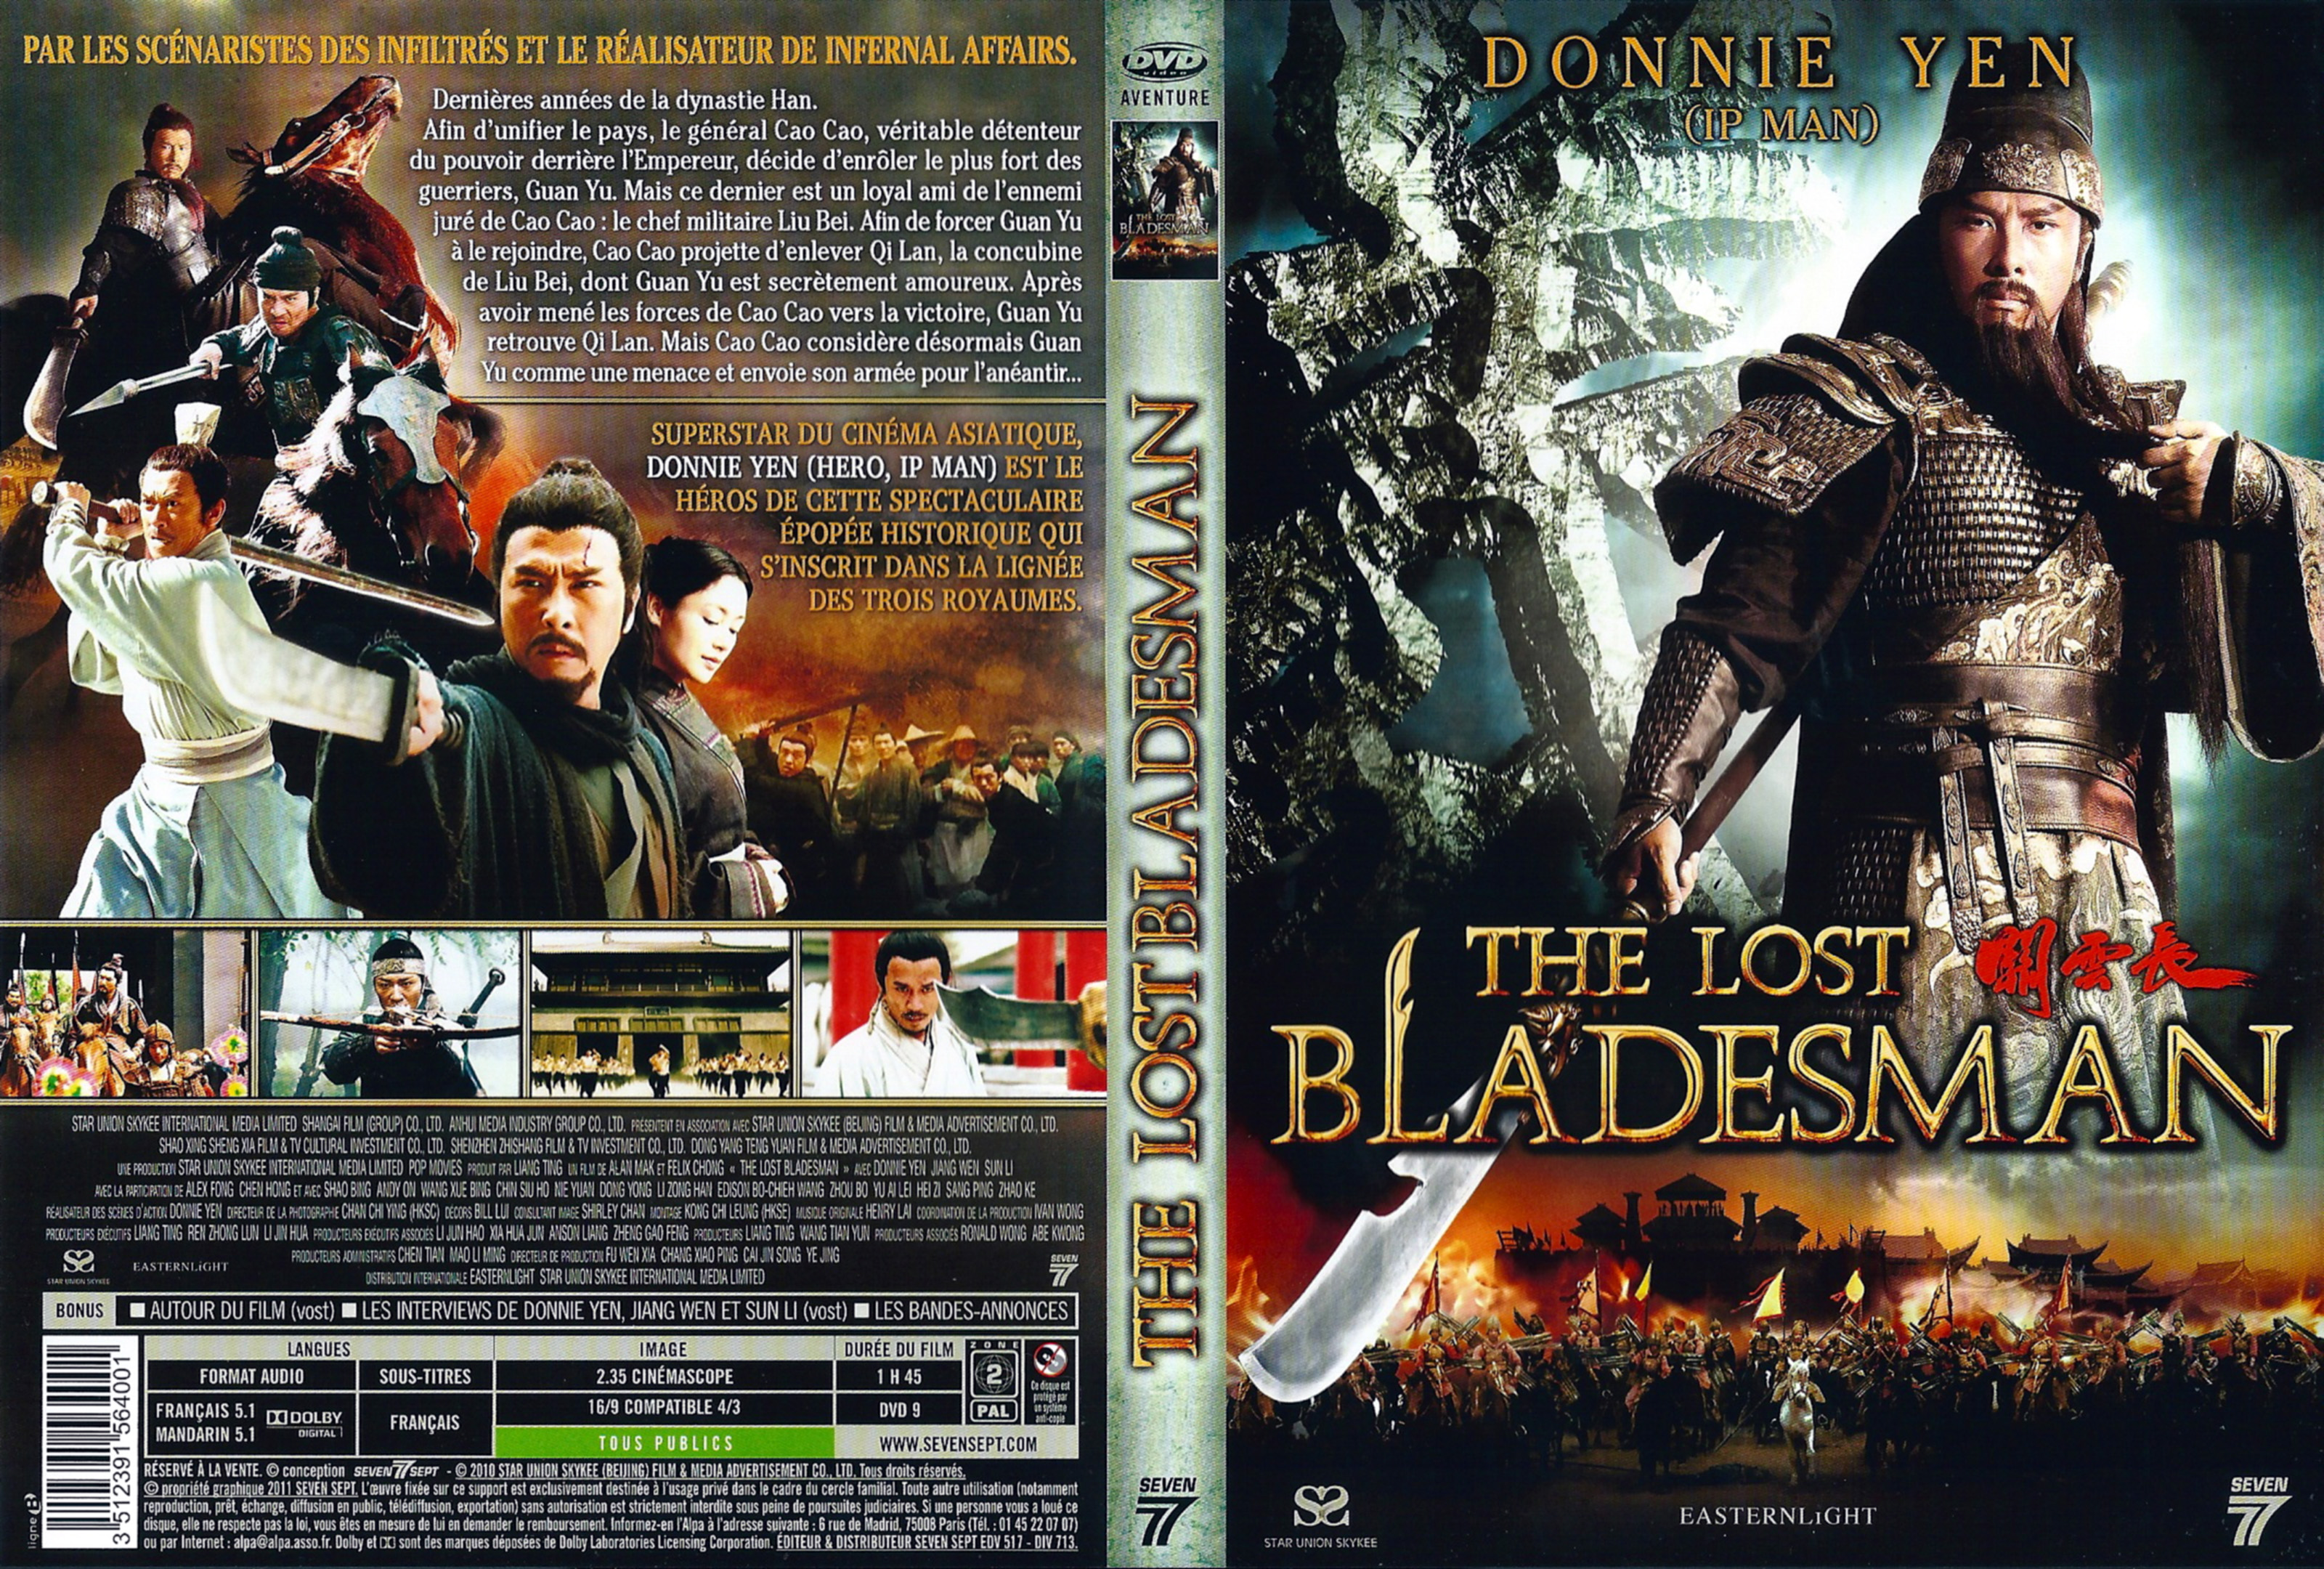 Jaquette DVD The lost bladesman